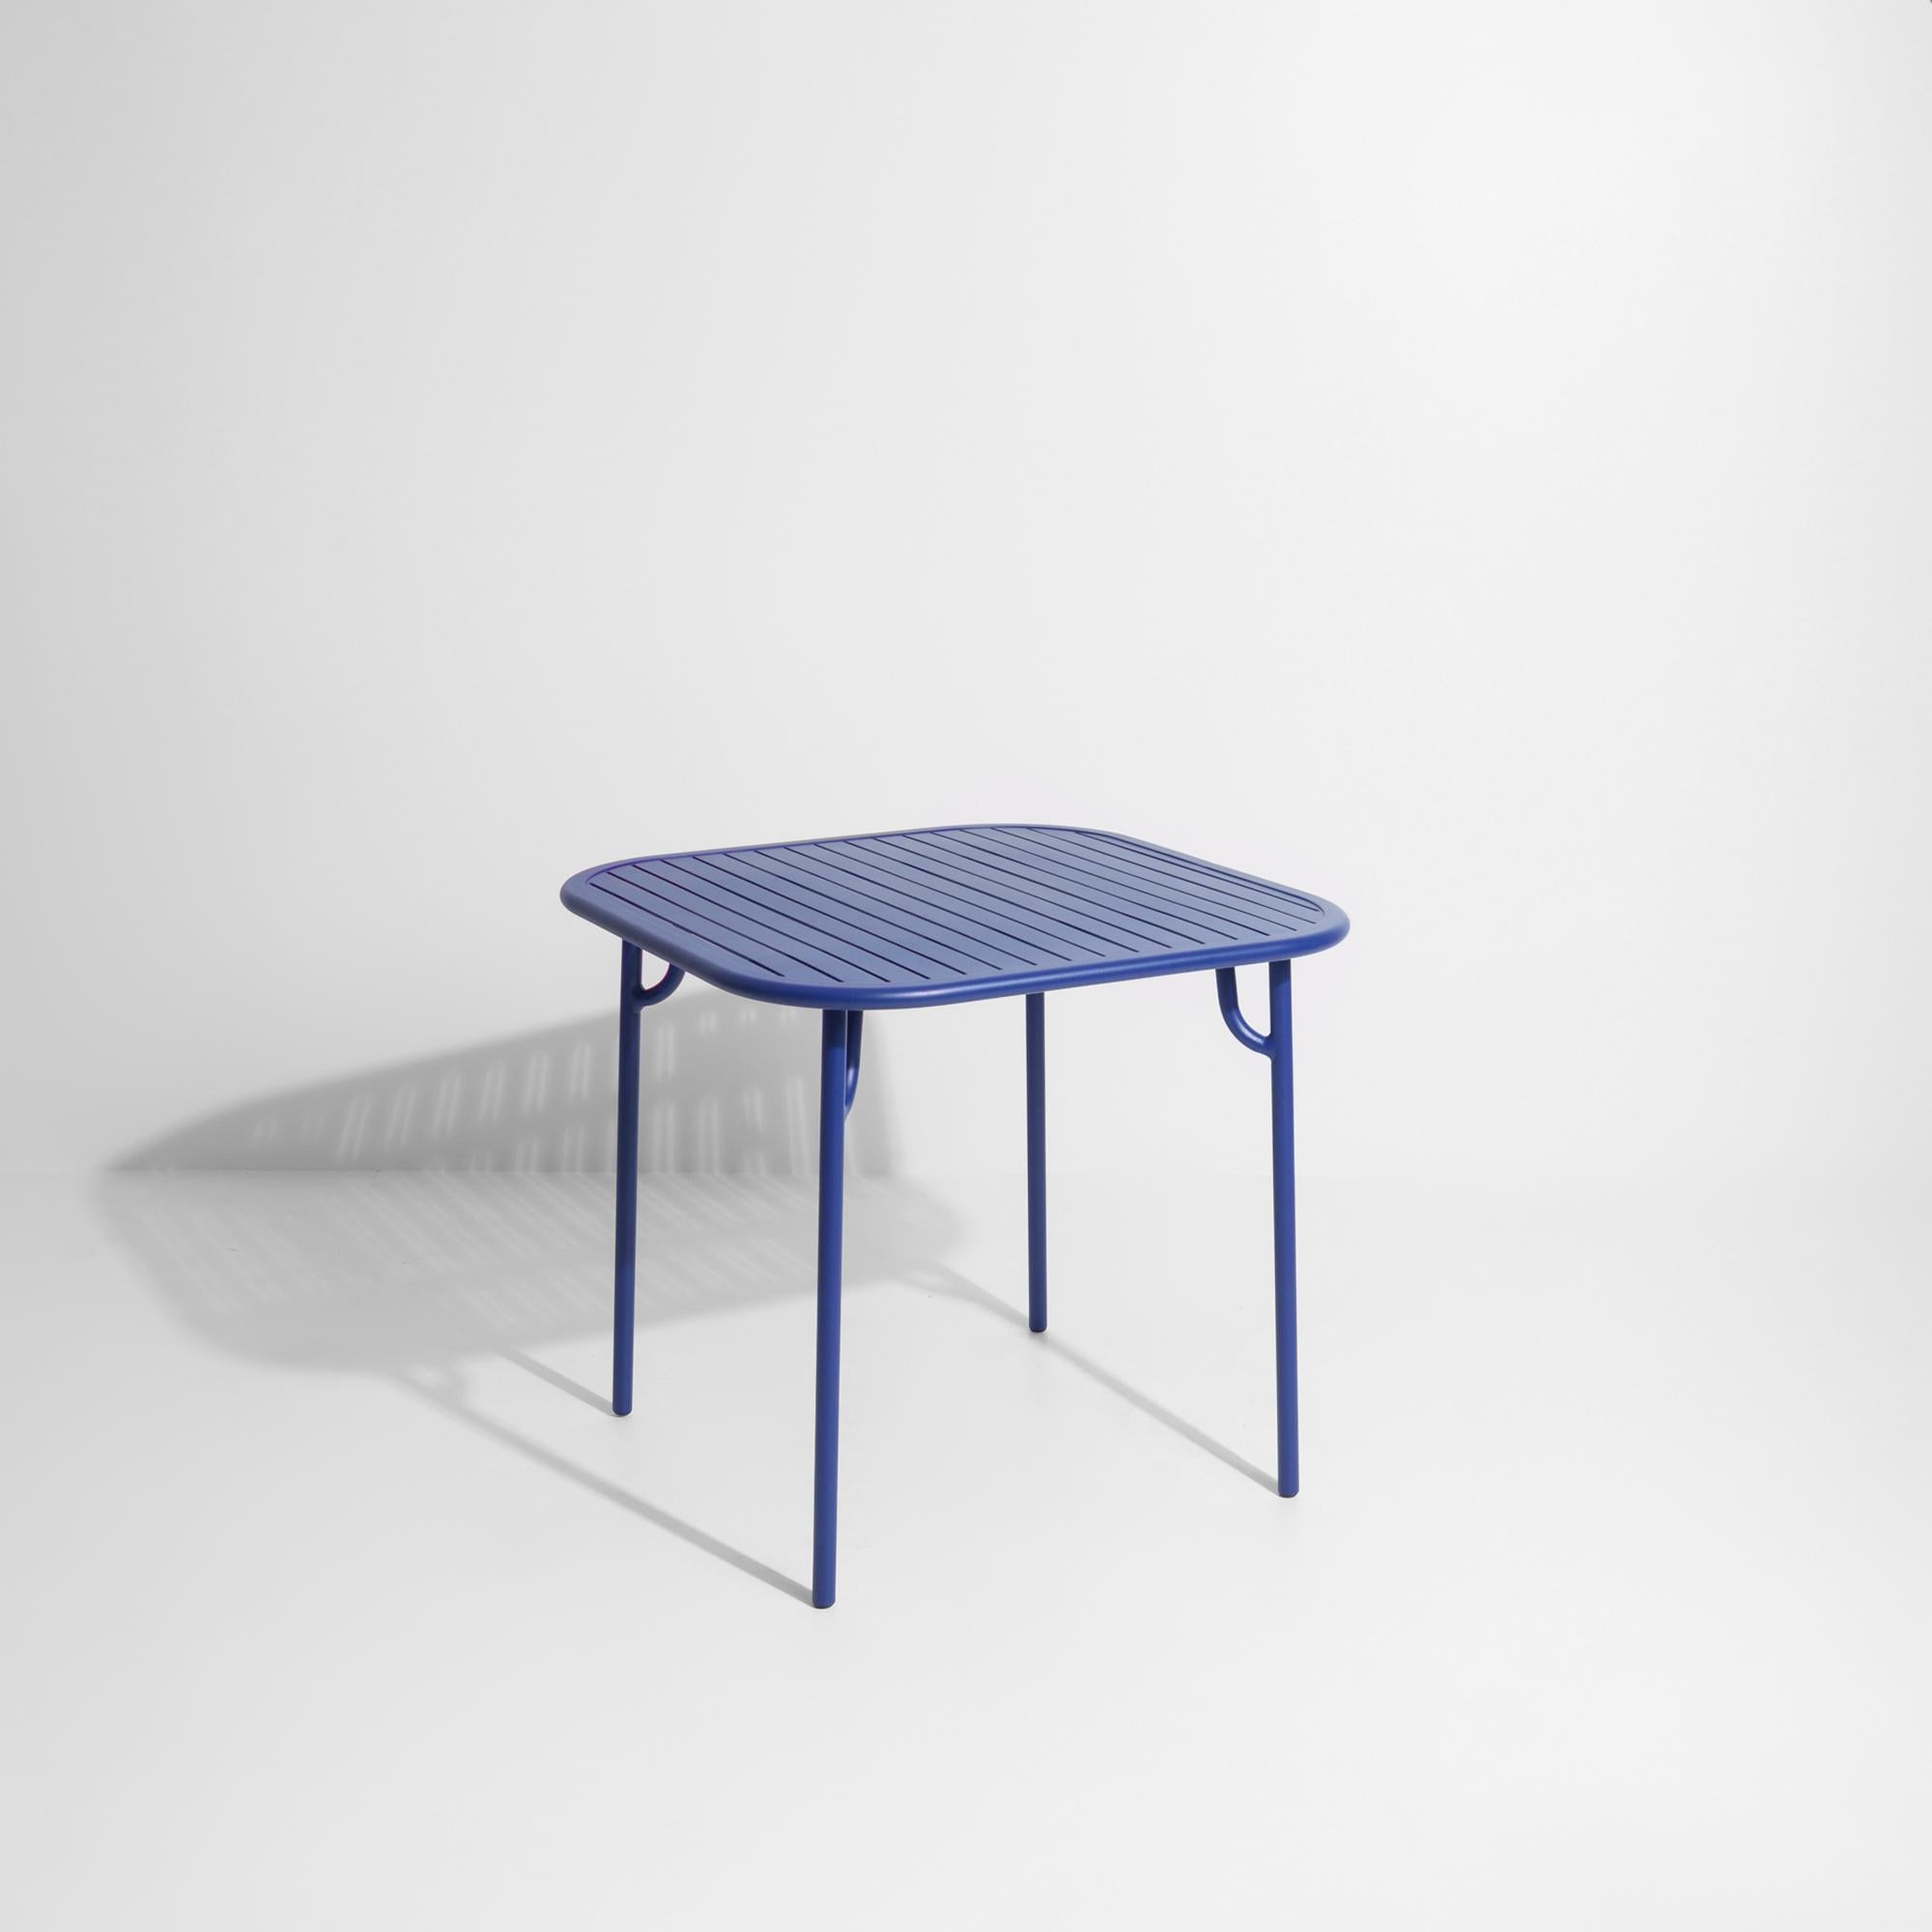 Petite Friture Week-End Square Dining Table in Blue Aluminium with Slats In New Condition For Sale In Brooklyn, NY